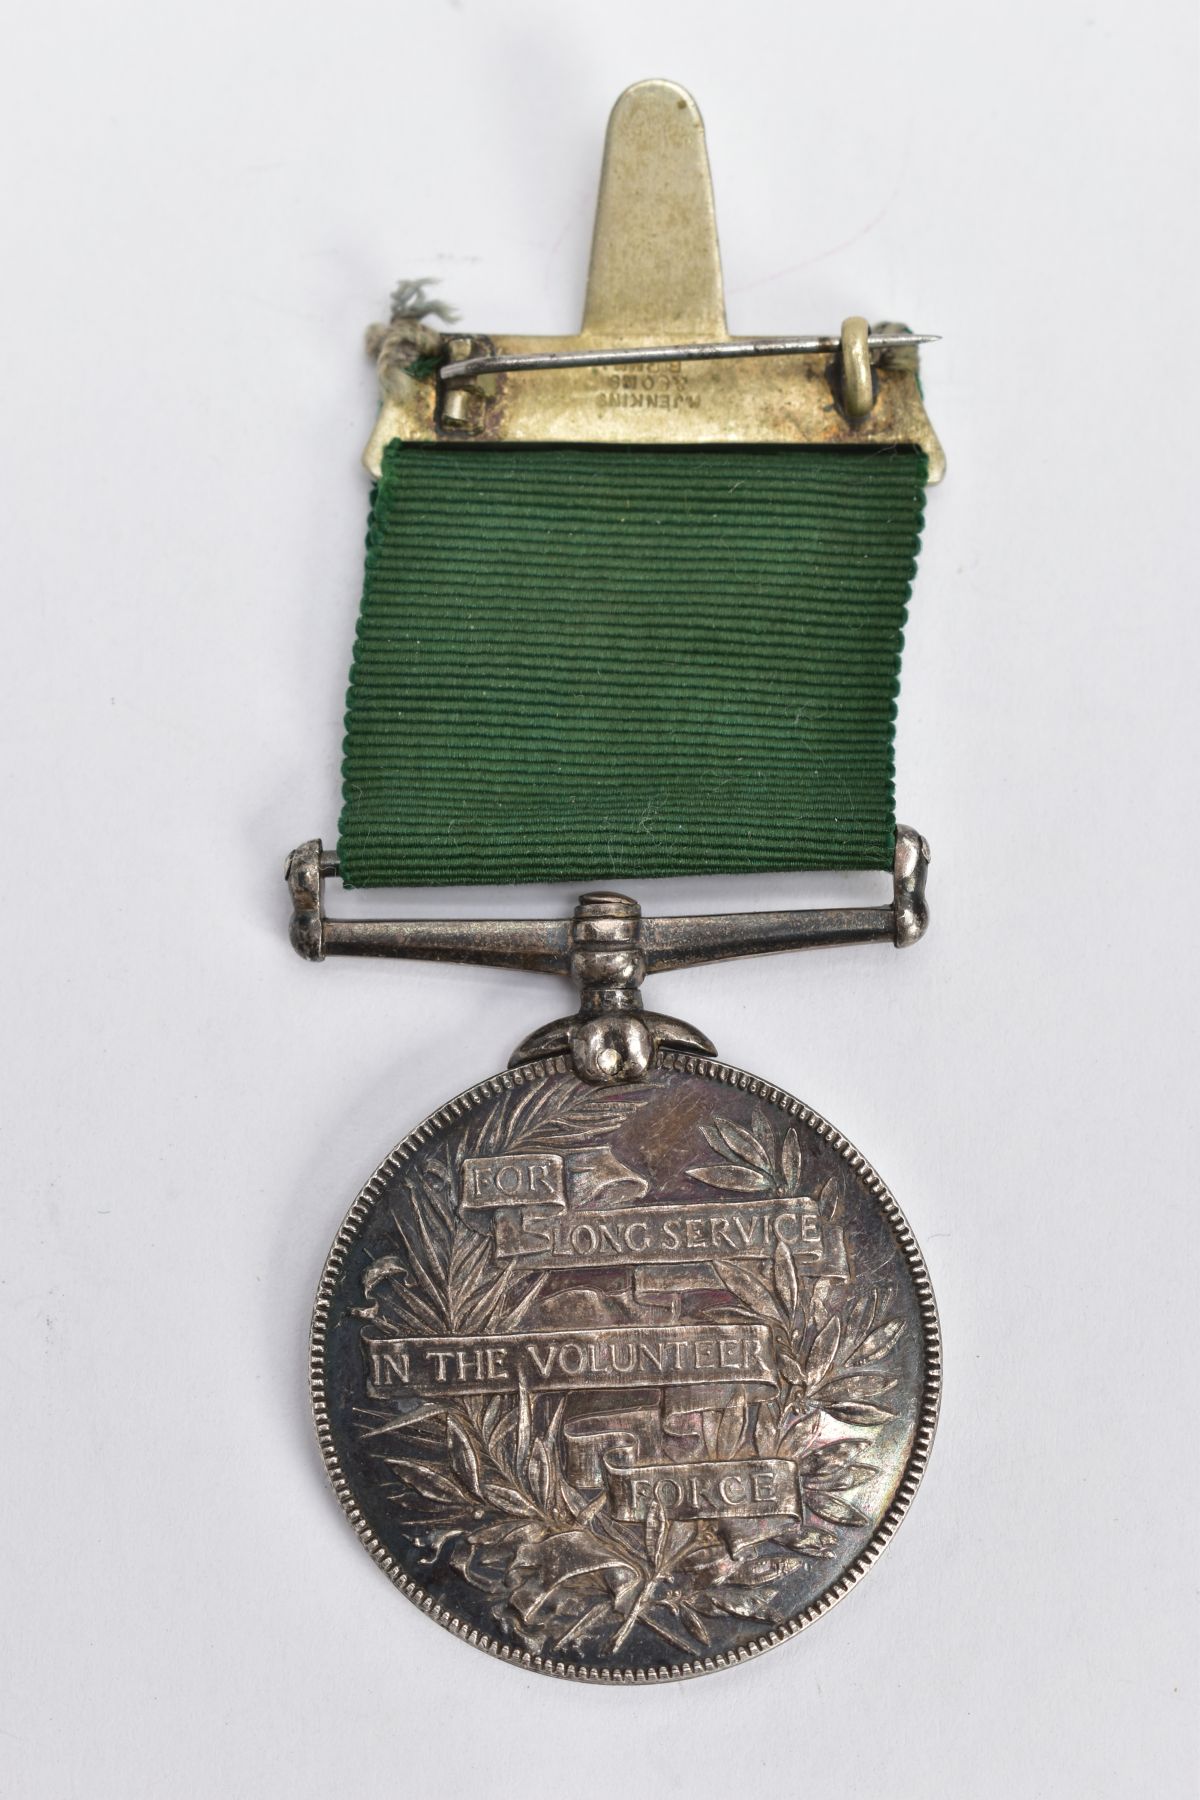 UN-NAMED EXAMPLE OF VICTORIA VOLUNTEER FORCE MEDAL, Victoria Regina Crowned head for Long service in - Image 2 of 6